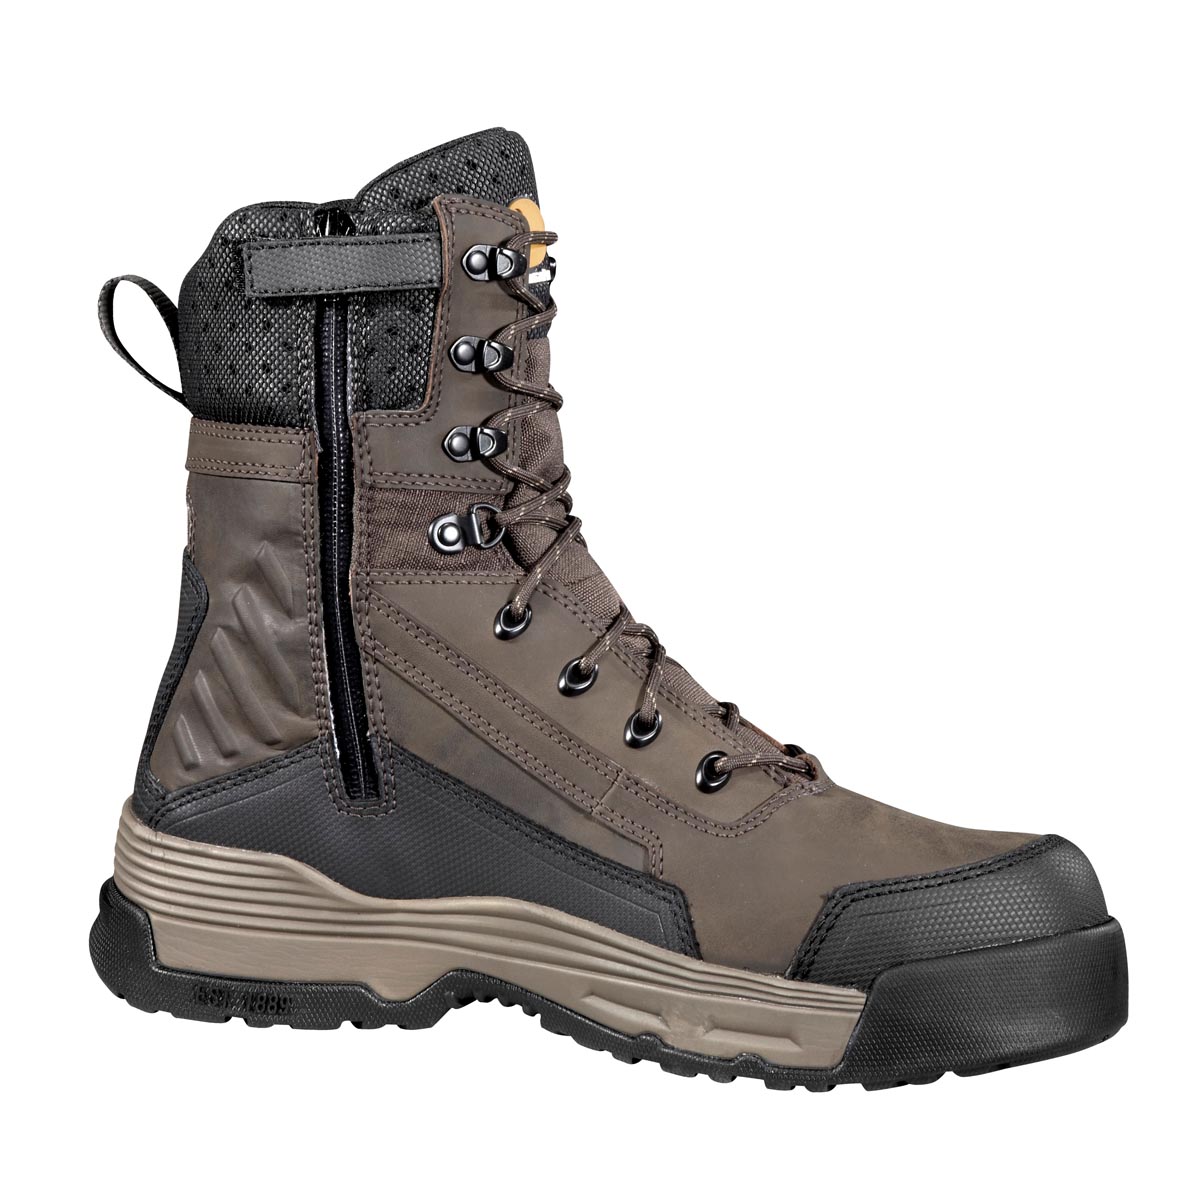 Carhartt Mens 8 Inch Waterproof Insulated Work Boot with Medial Side Zip Composite Toe